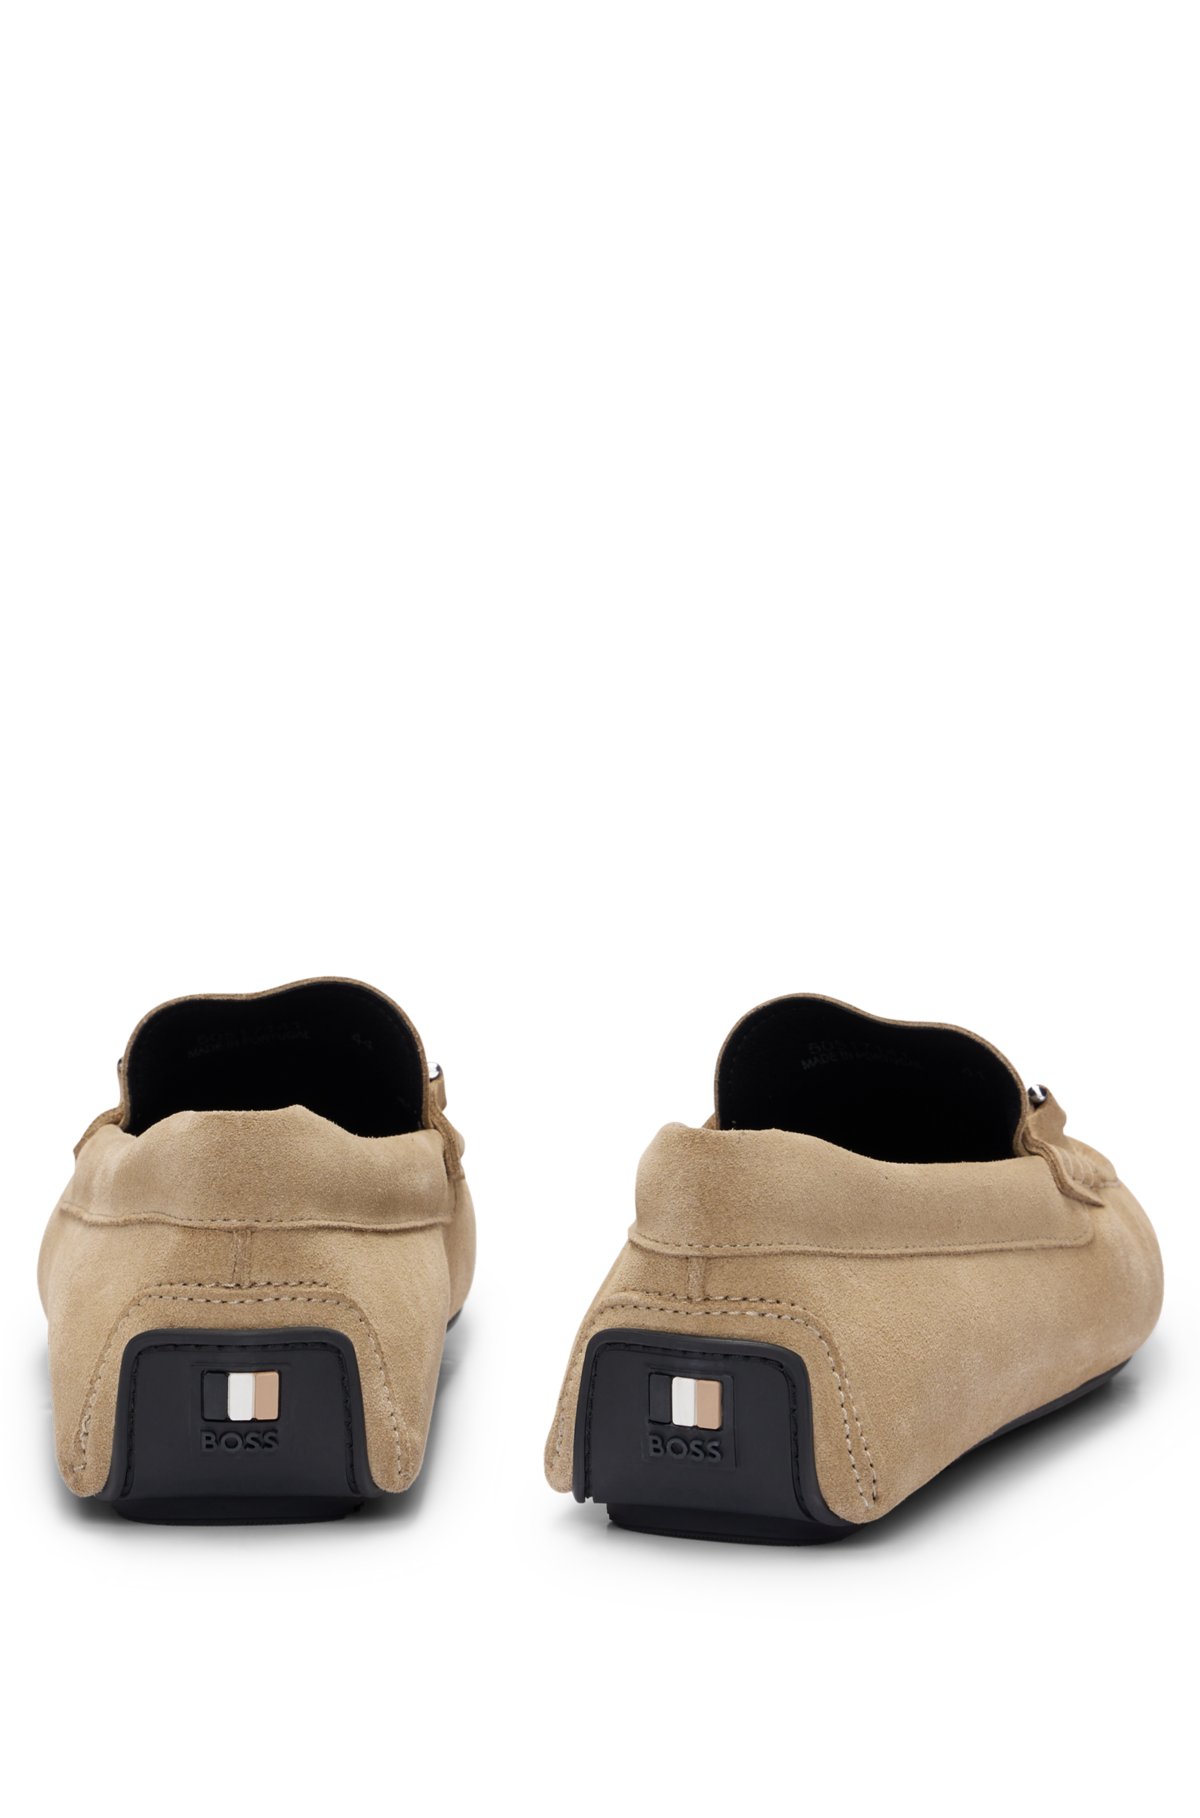 Suede moccasins with branded hardware and full lining, Beige